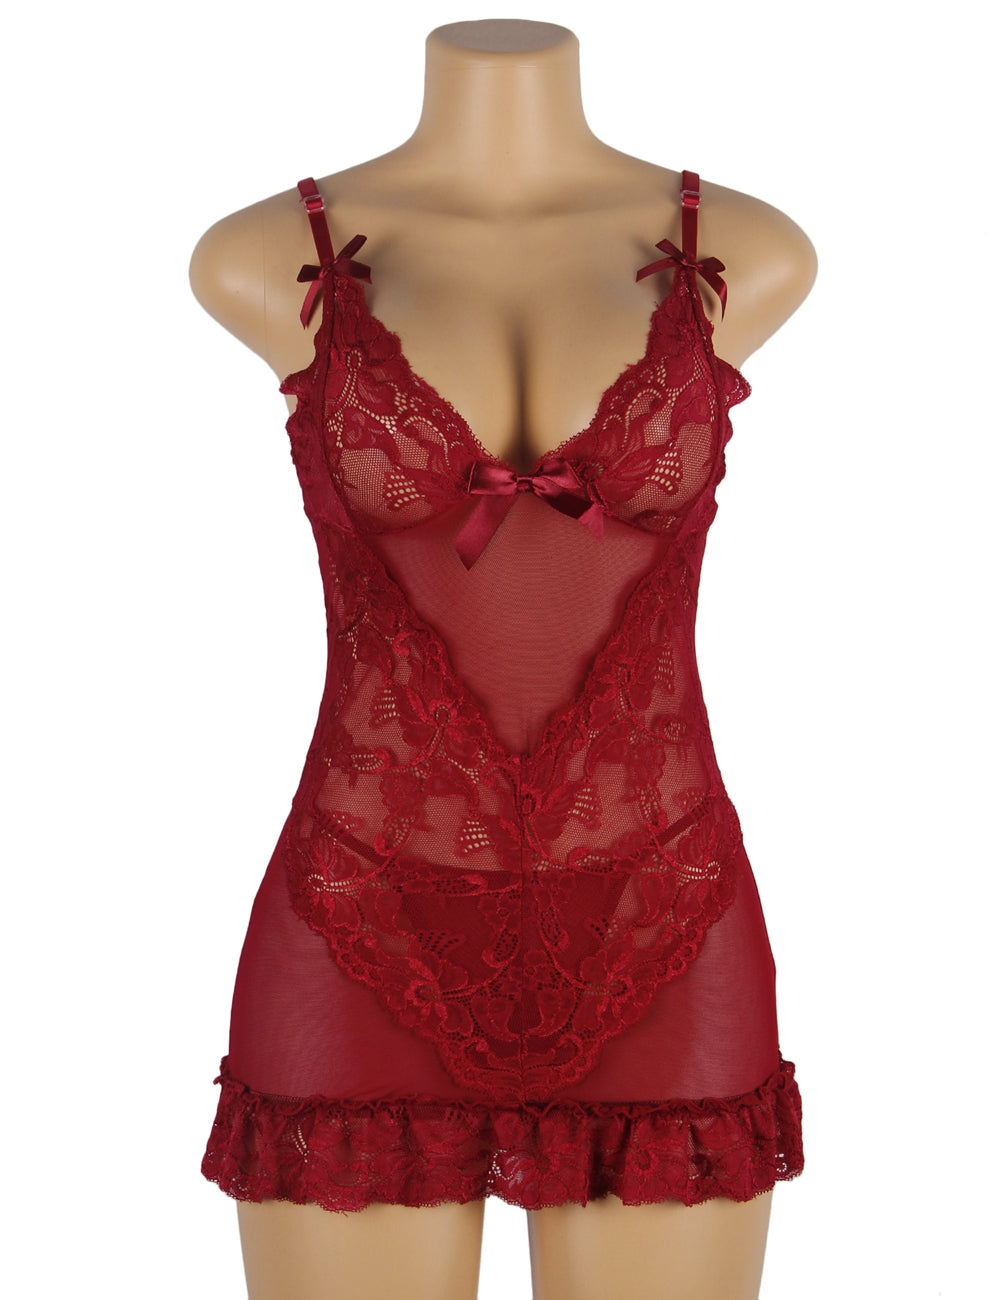 Plus Size Stylish Sheer Lace Transparent Embroidered Babydoll